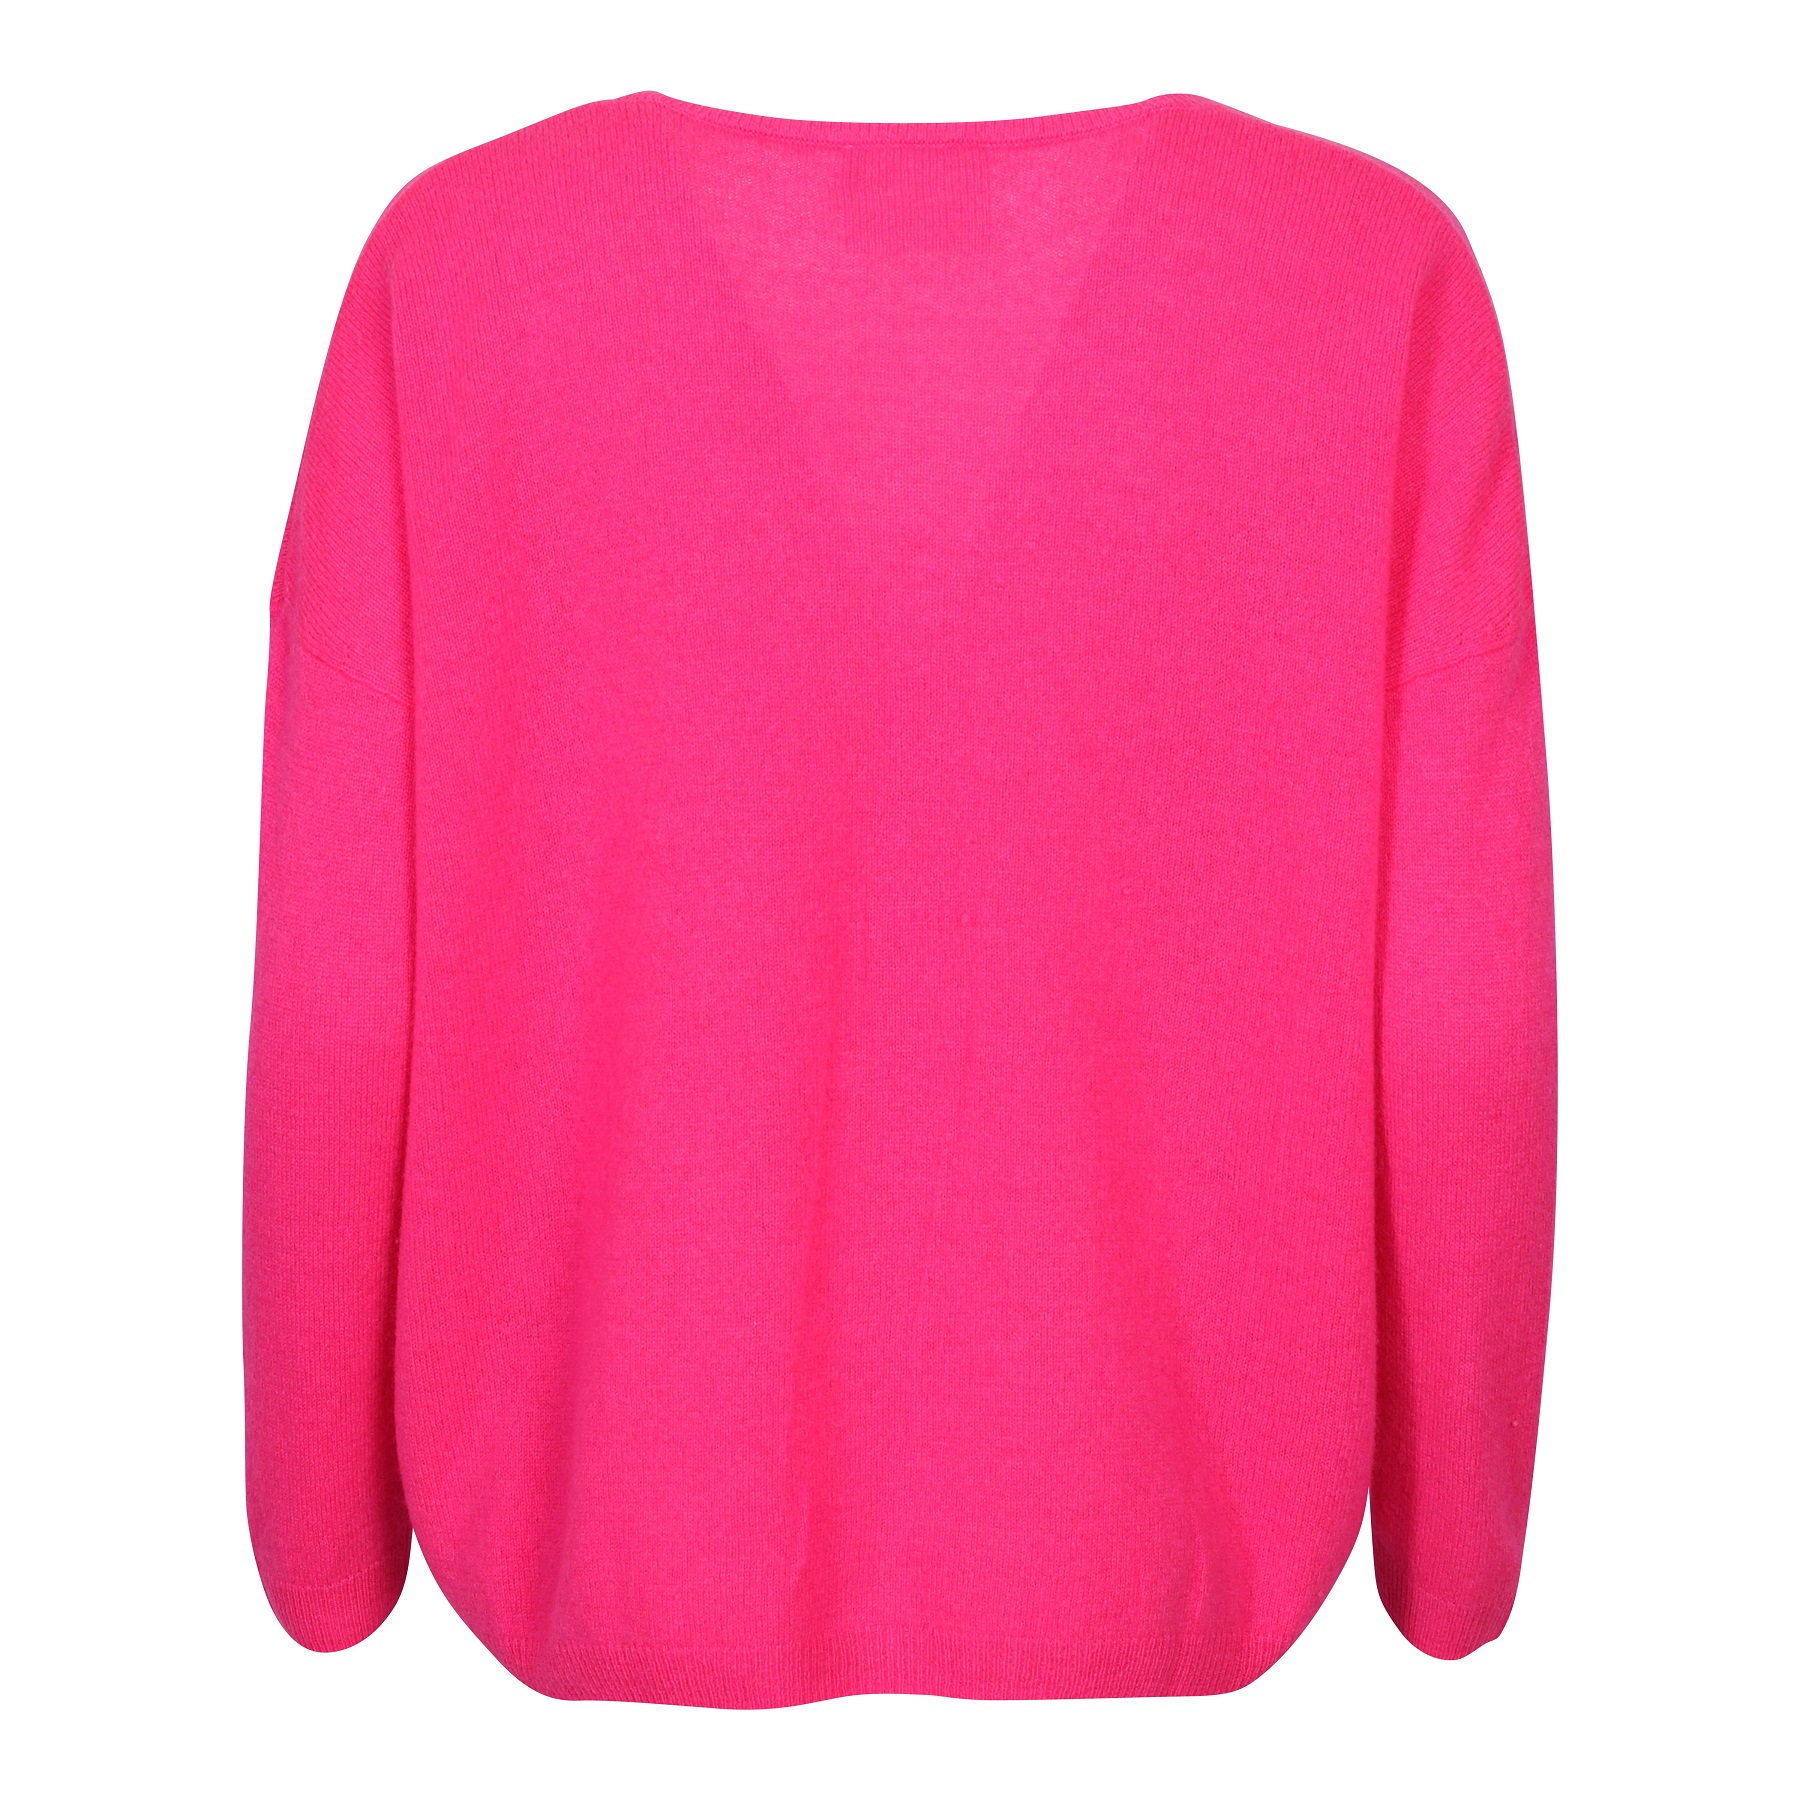 Absolut Cashmere Pullover Angele in Pink M